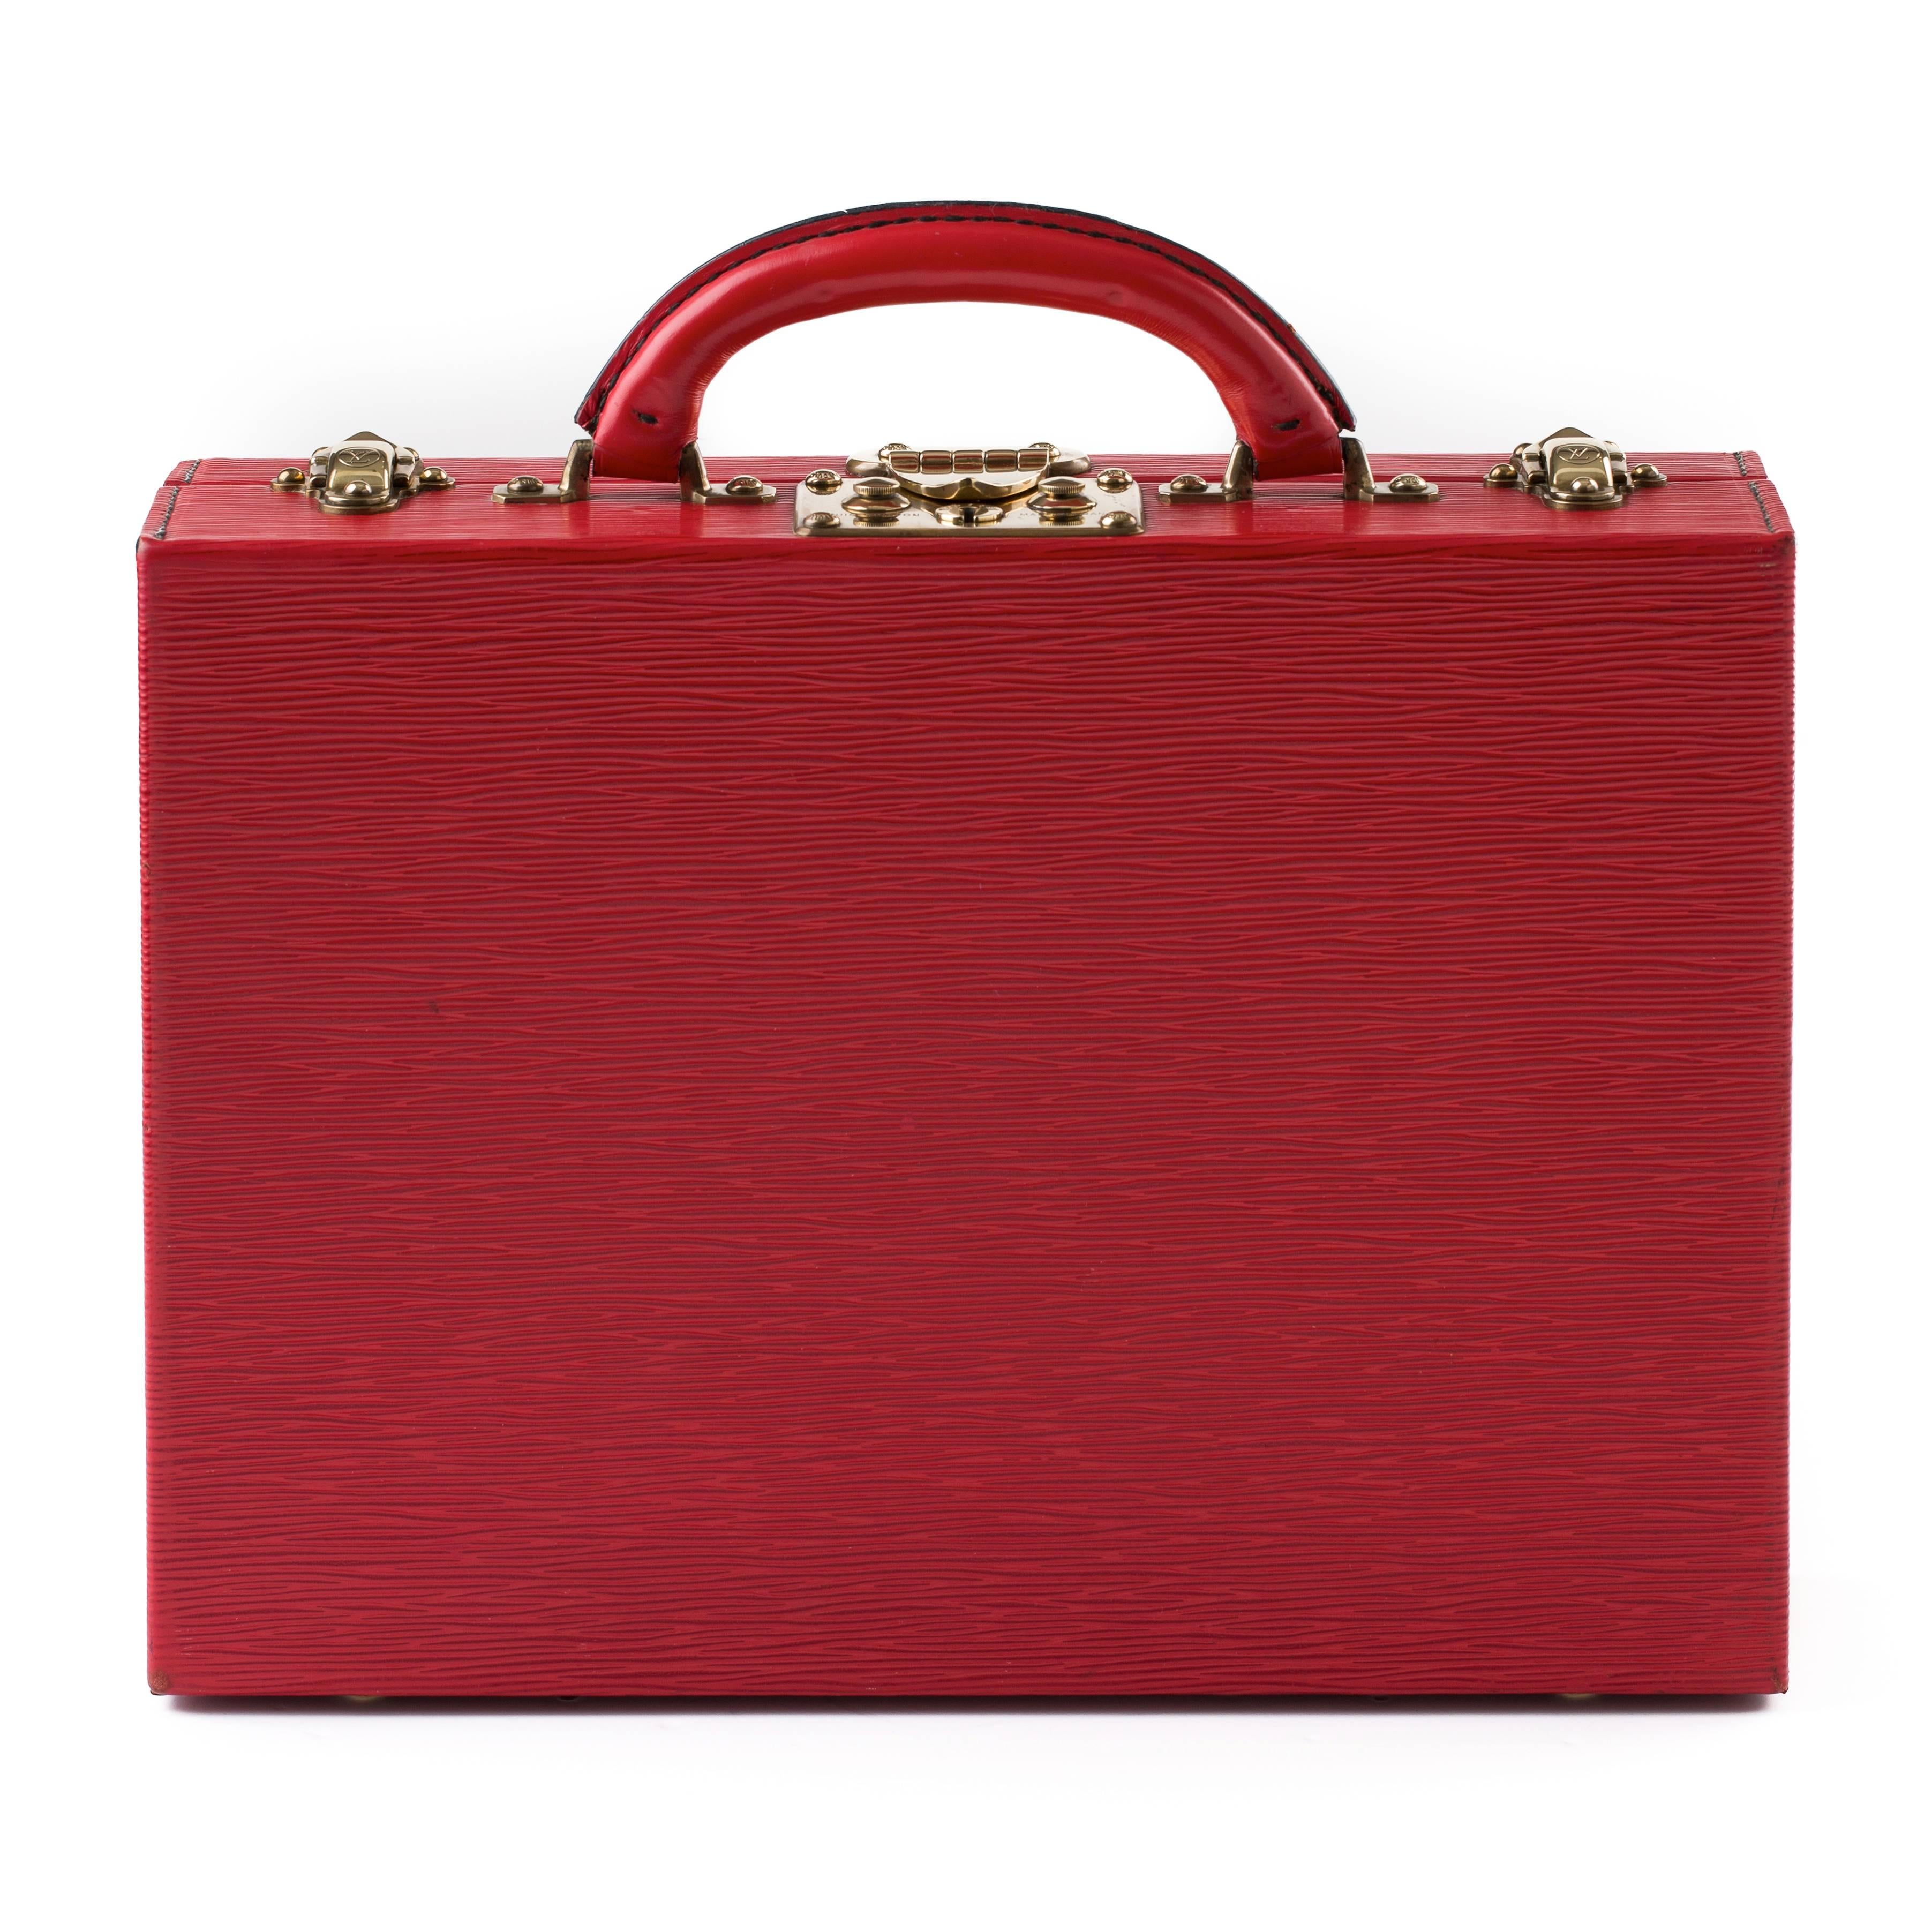 Beautiful Louis Vuitton jewelry case in red Epi leather with brass hardware.
The jewellery case features a black leather lined interior with one removable tray.
The compartments in the removable tray and in the underside of the case are all lined